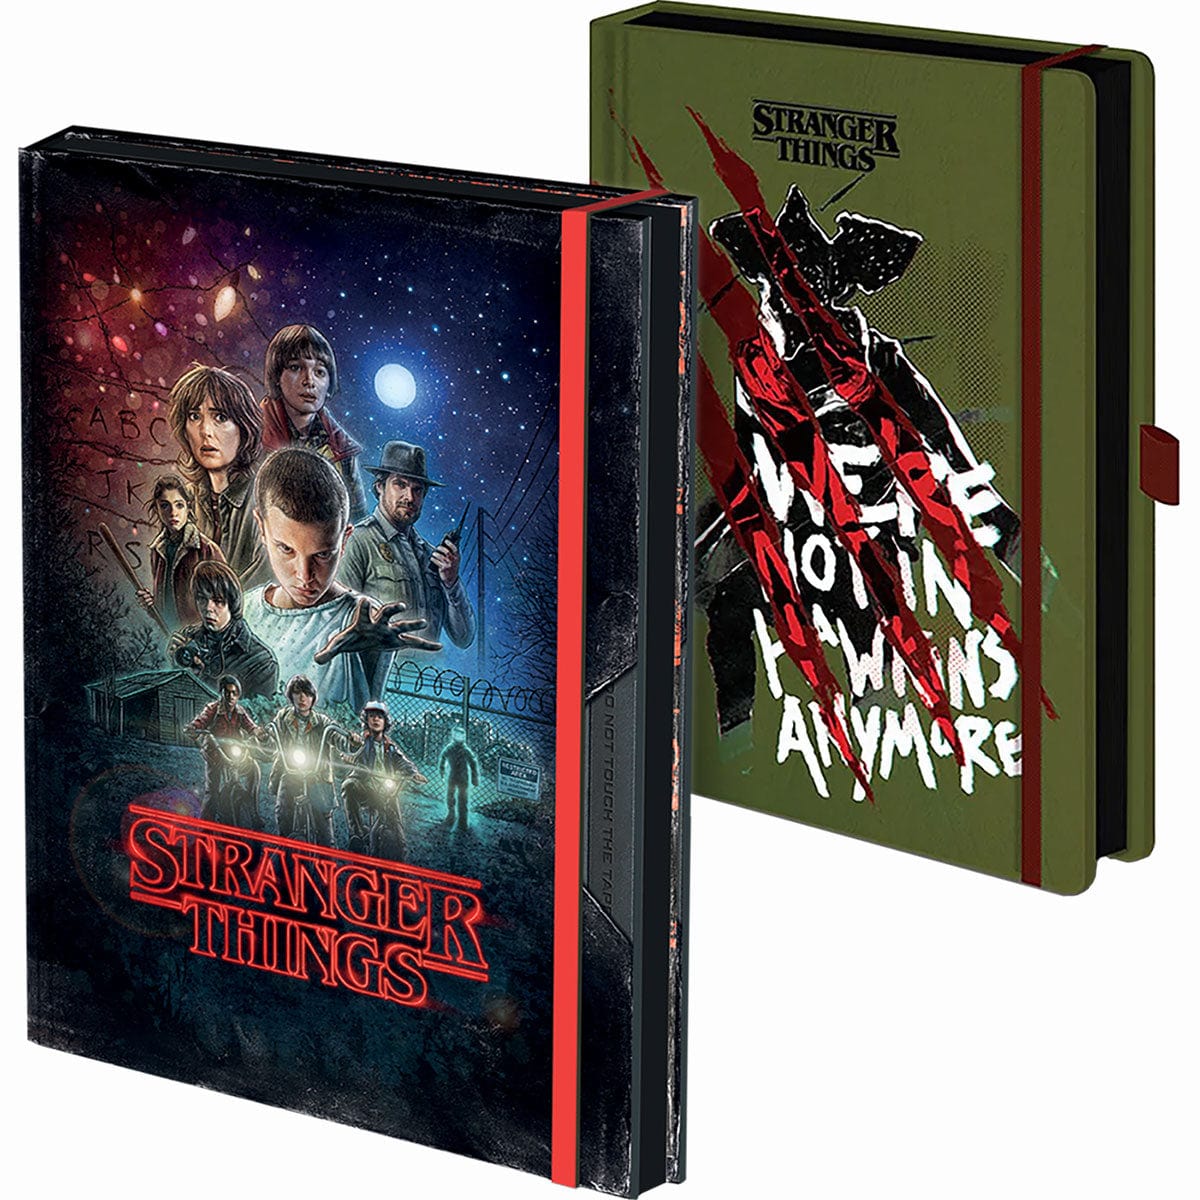 STRANGER THINGS - NOT IN HAWKINS AND SEASON 1 VHS - Premium A5 Notebook - Spiral USA